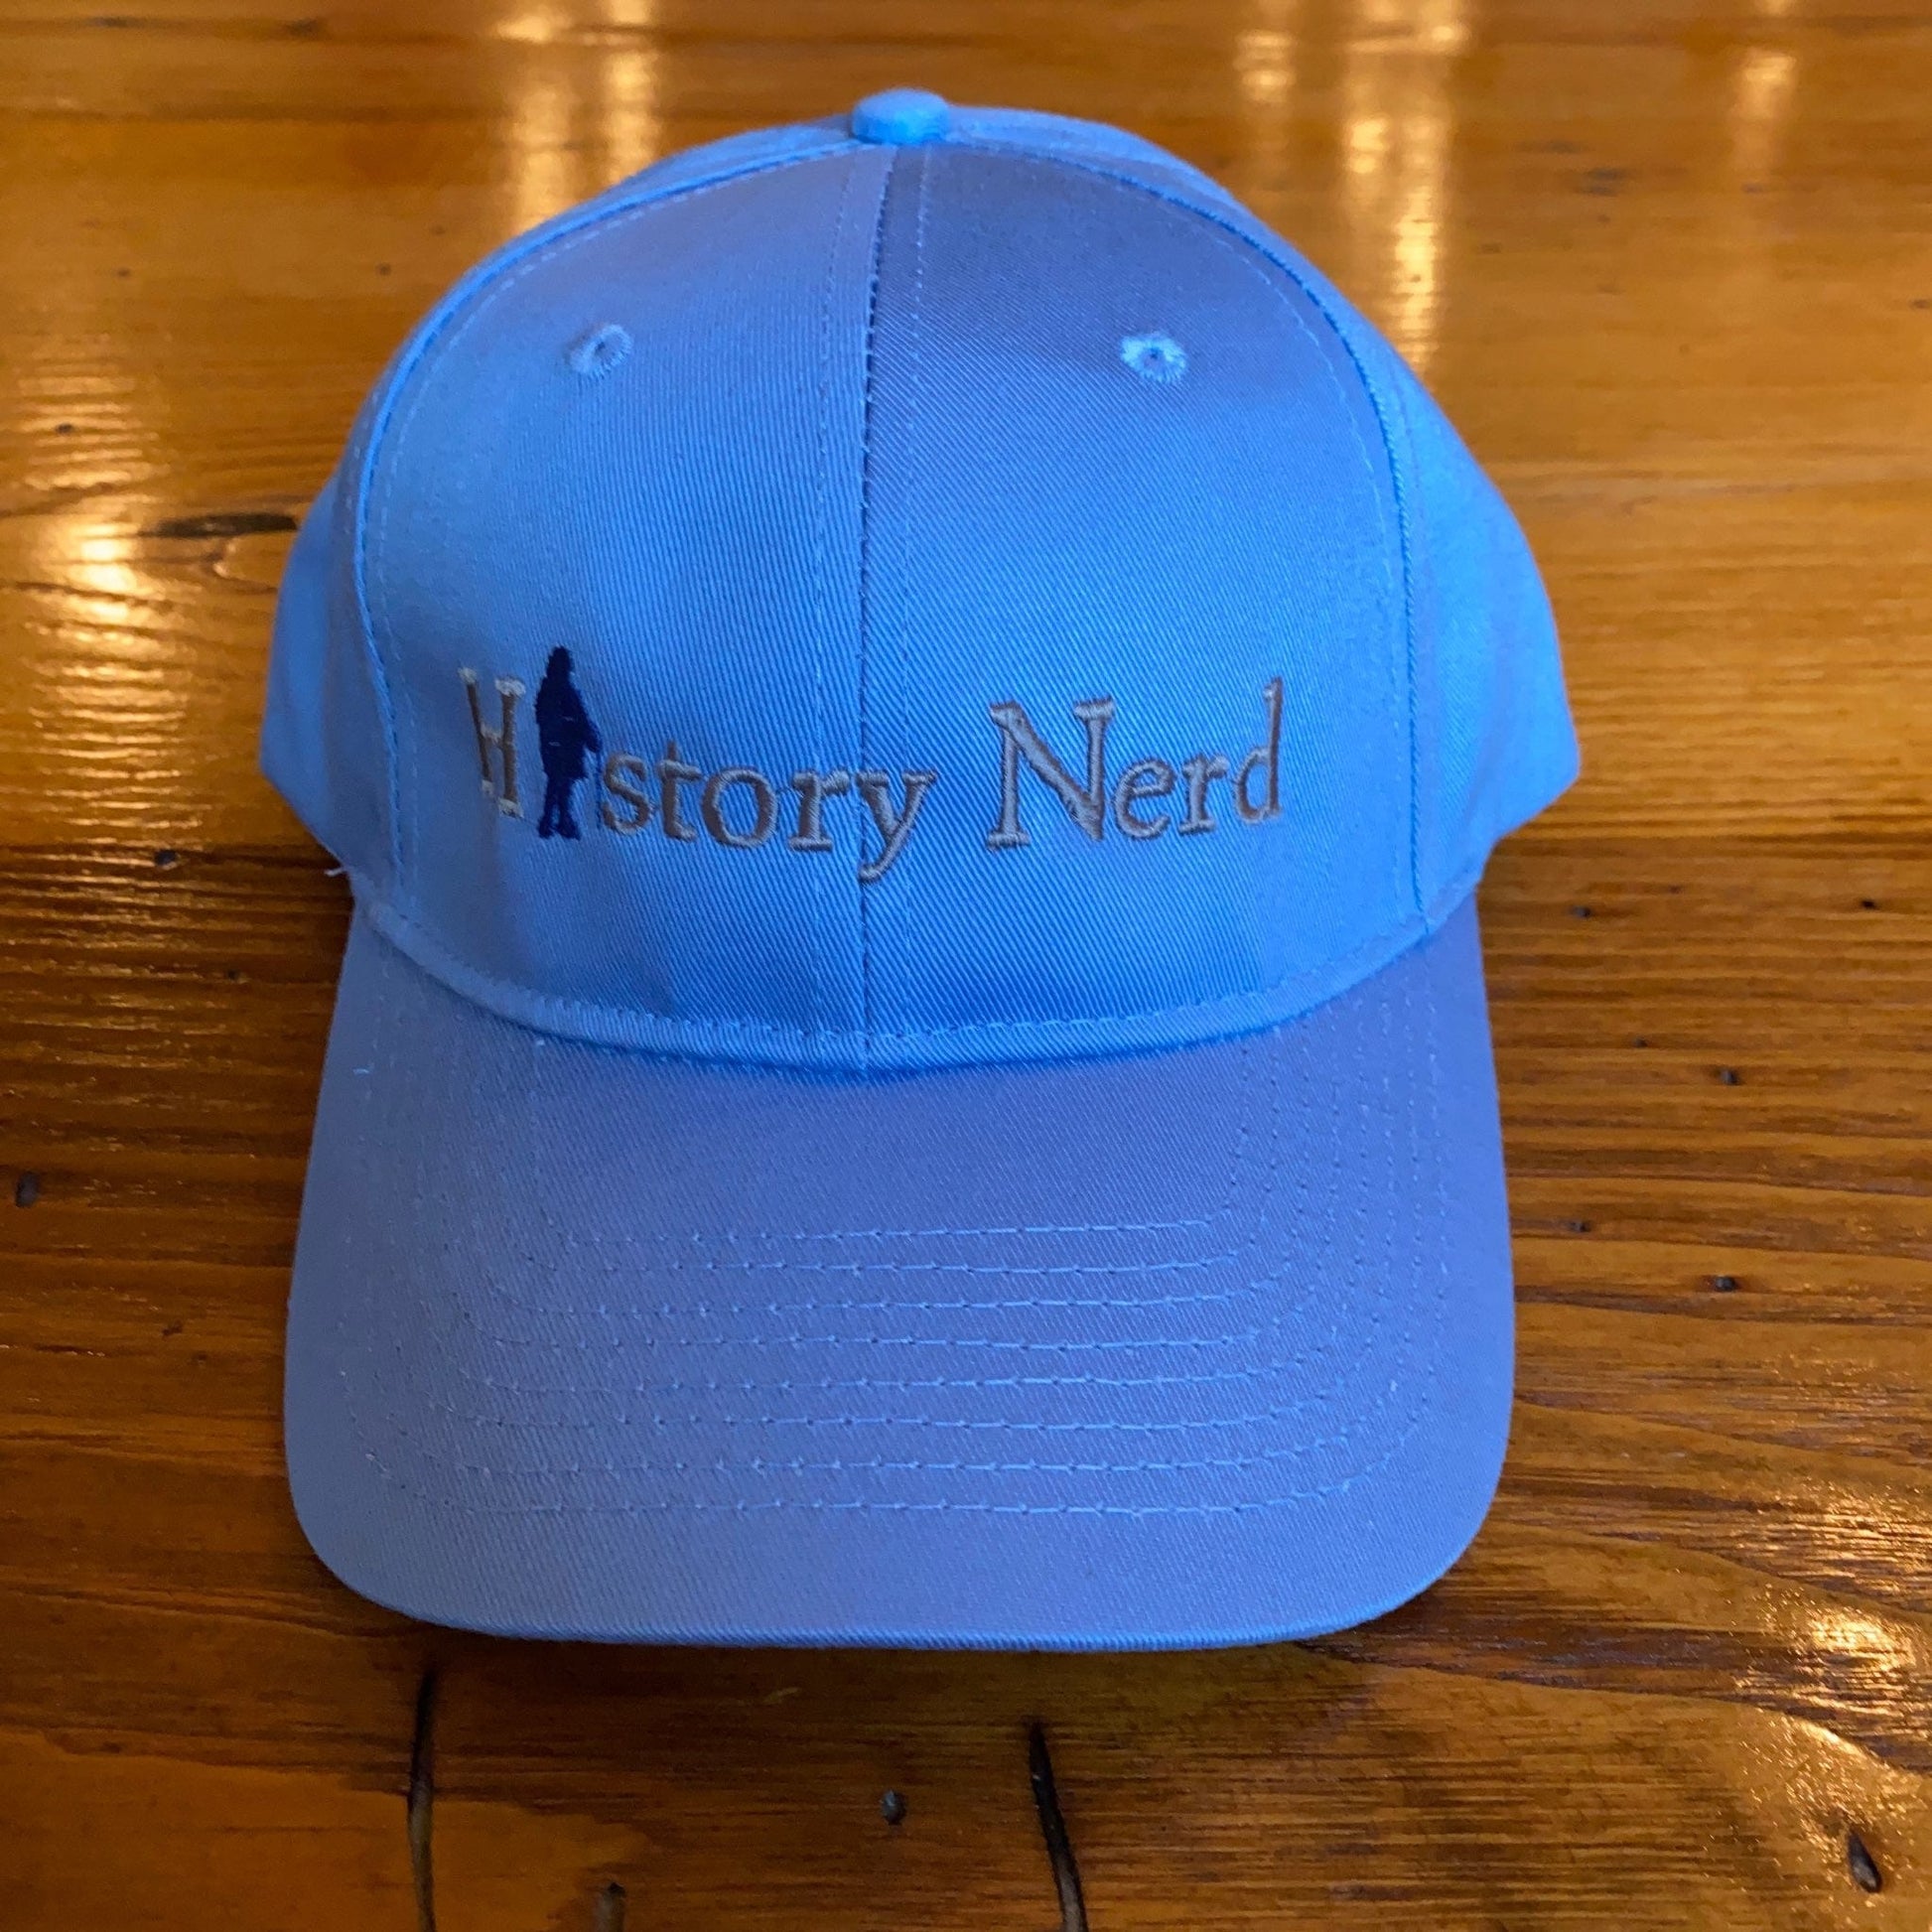 Embroidered "History Nerd" with Ben Franklin cap - Carolina blue from The History List Store